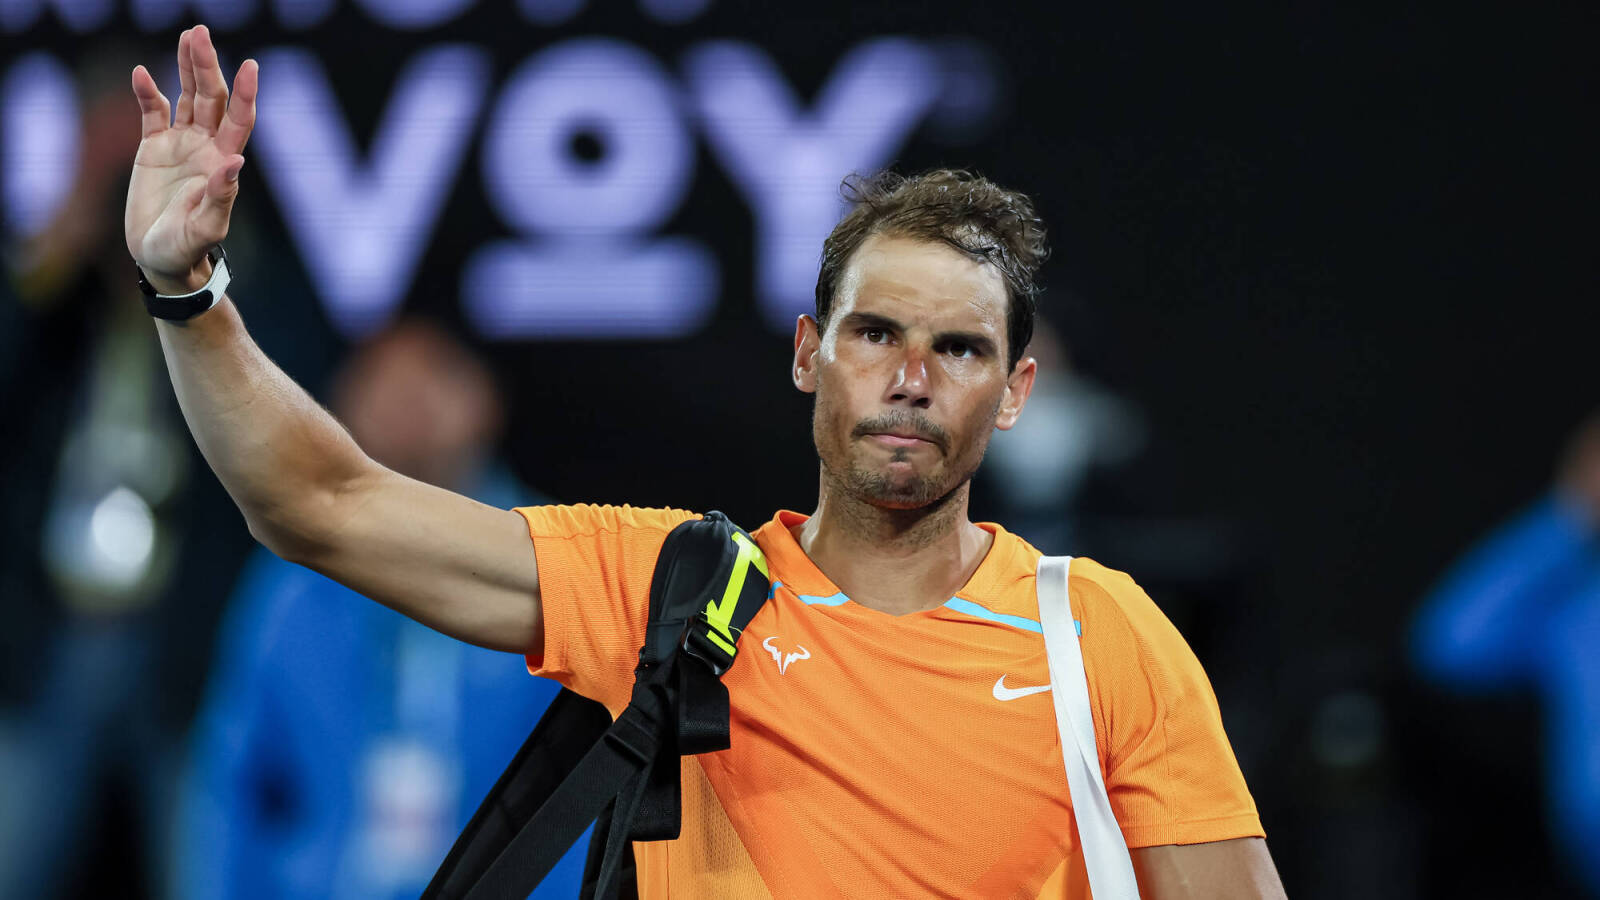 'Respectful, well-educated, and good person,' Rafael Nadal reveals the legacy he wants to leave behind